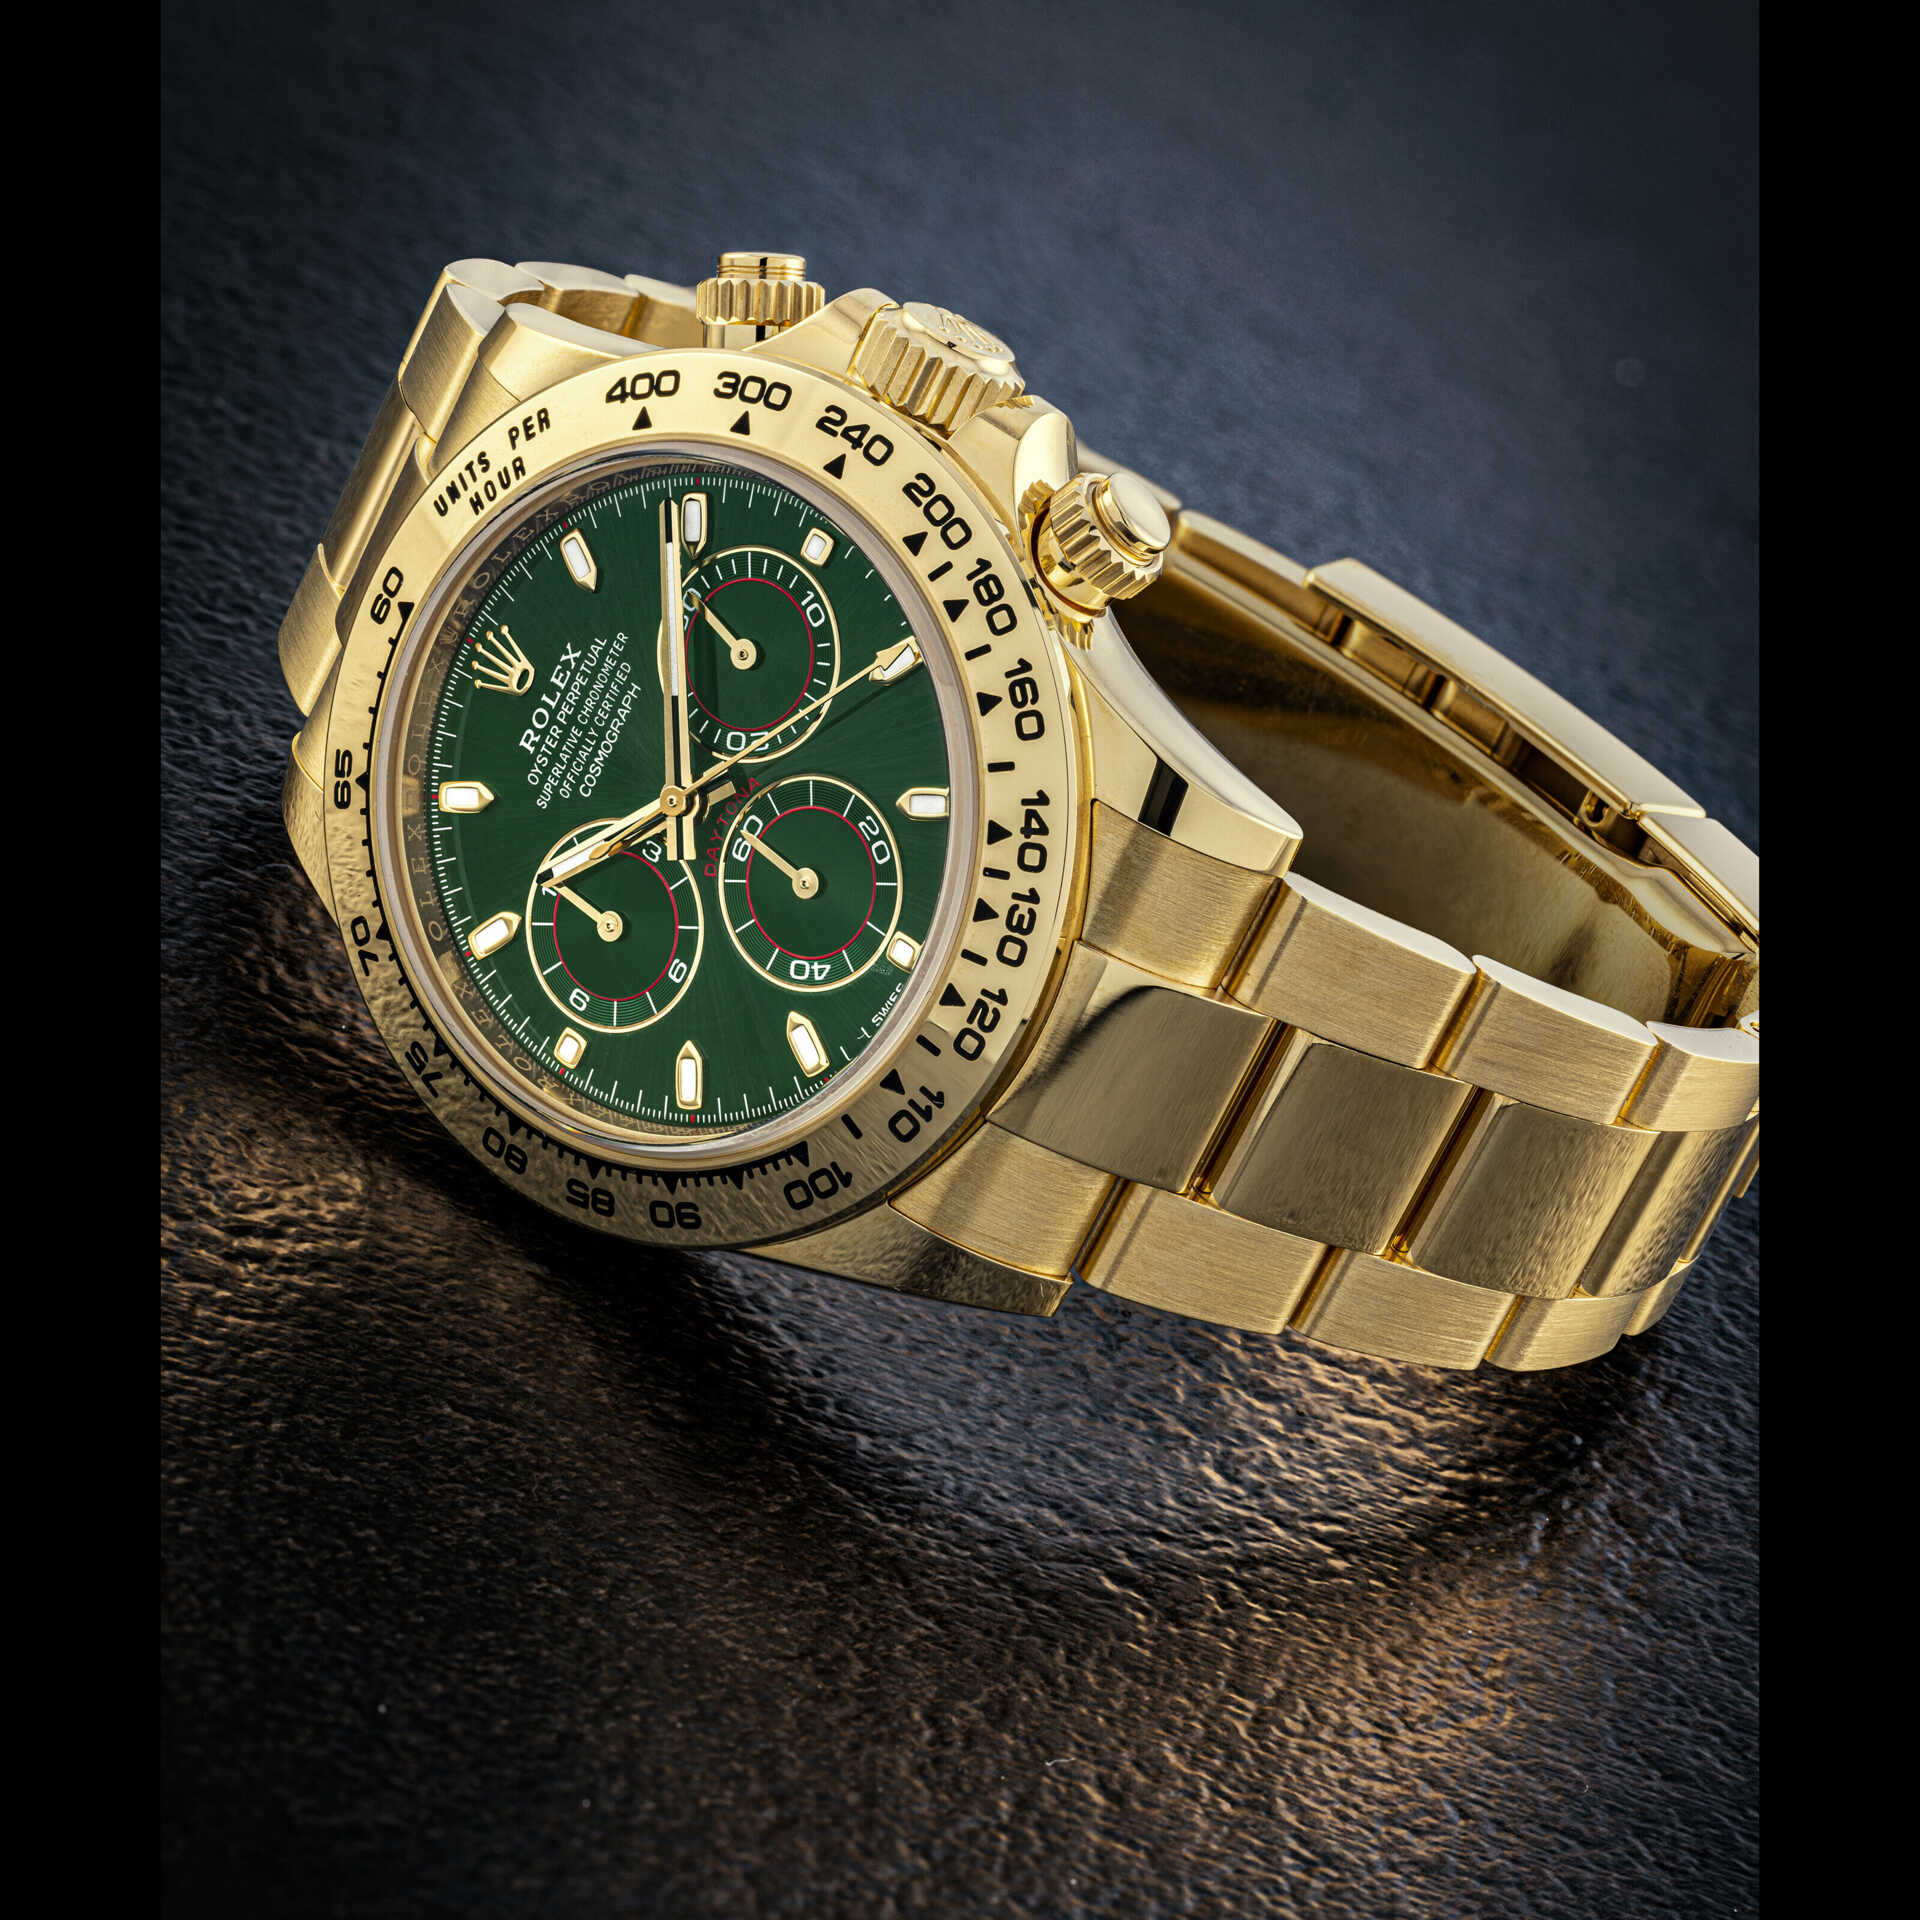 ROLEX. AN 18K GOLD AUTOMATIC CHRONOGRAPH WRISTWATCH WITH BRACELET AND GREEN DIAL